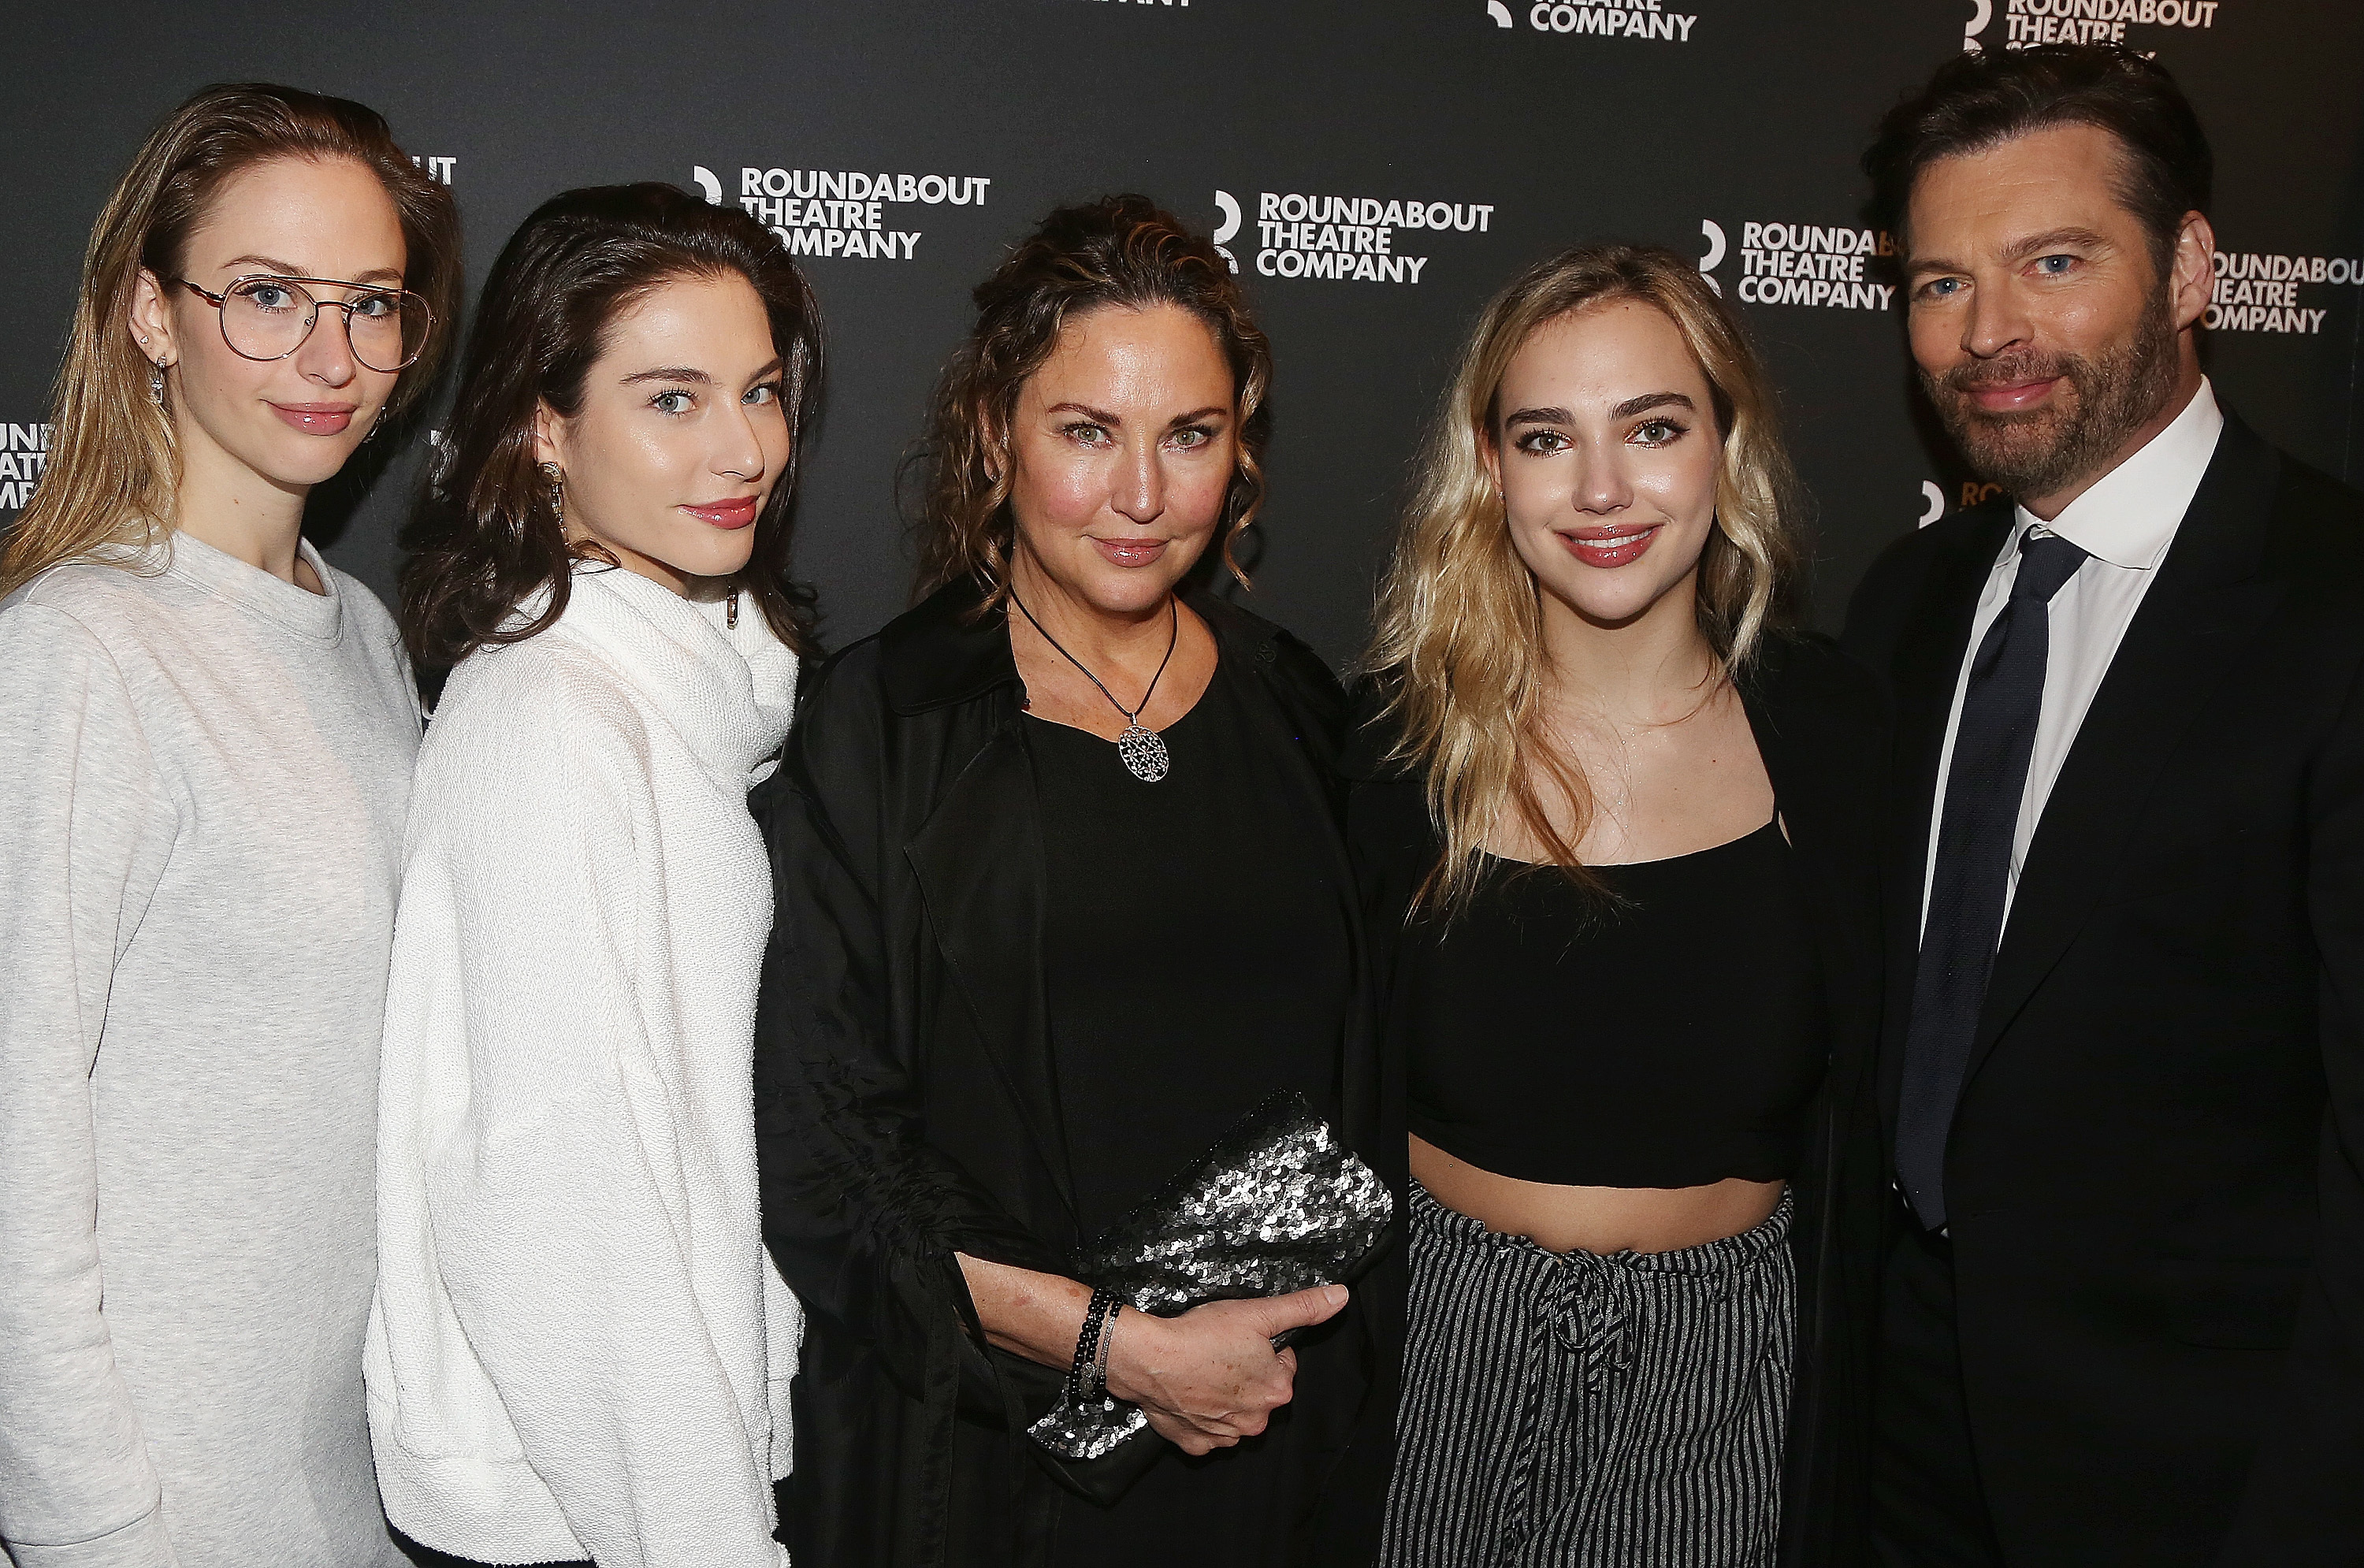 <p>Back to Broadway! Jill Goodacre and Harry Connick Jr. hit the red carpet with daughters Georgia (born in 1996), Kate (born in 1997) and Charlotte (born in 2002) for the Roundabout Theatre Company's production of "Kiss Me Kate" on March 14, 2019.</p>